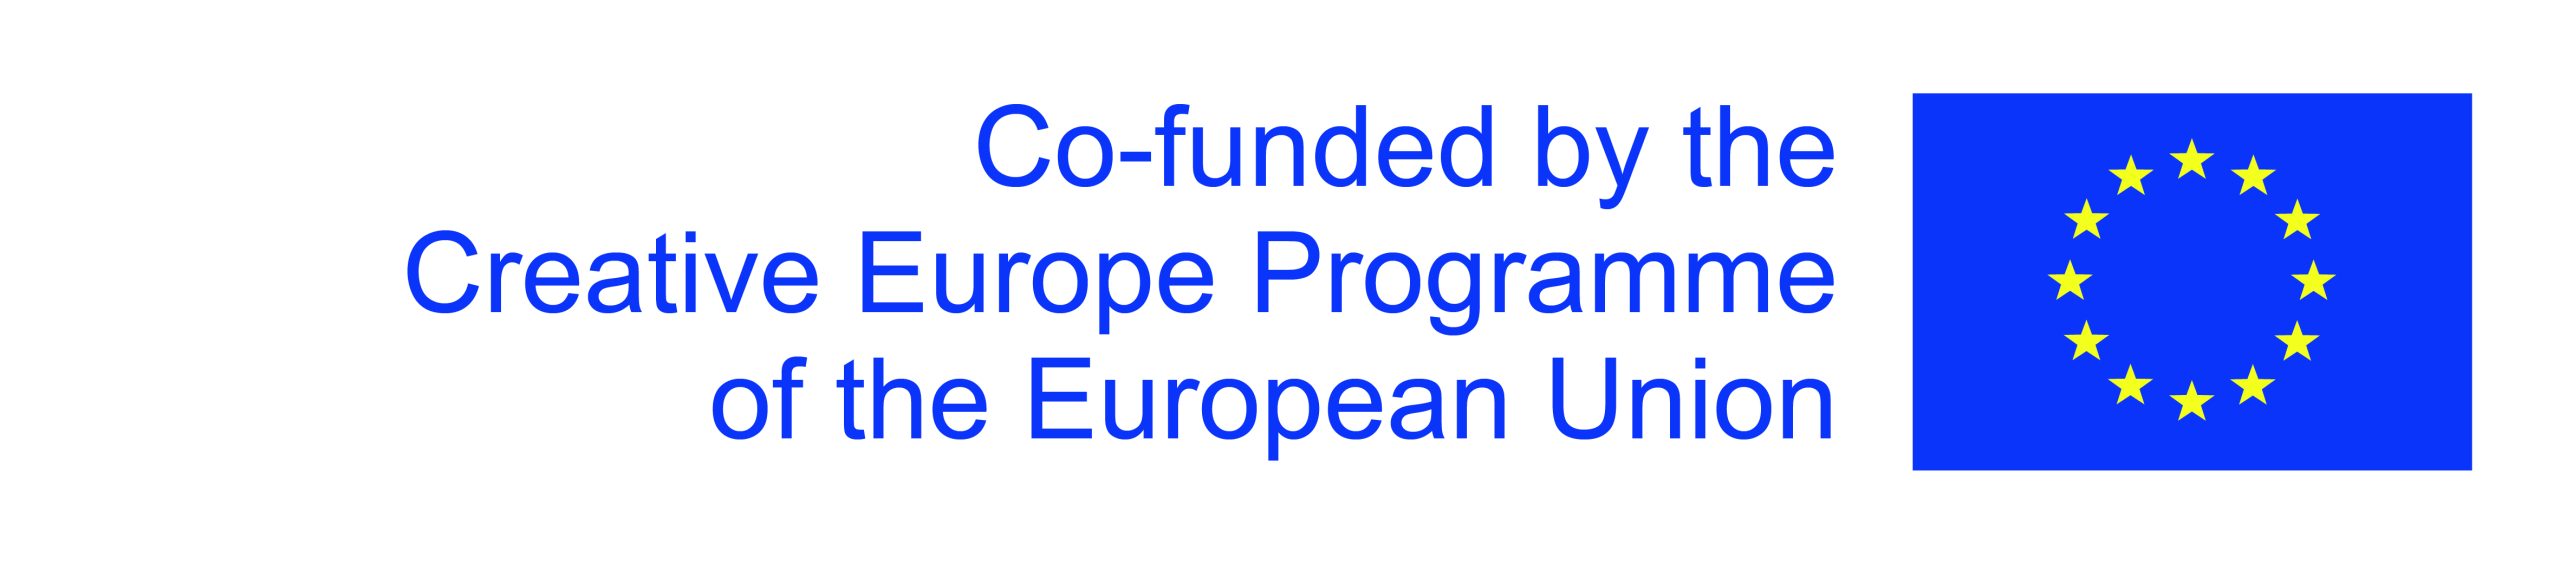 Co-funded by the EU Creative Europe Programme.